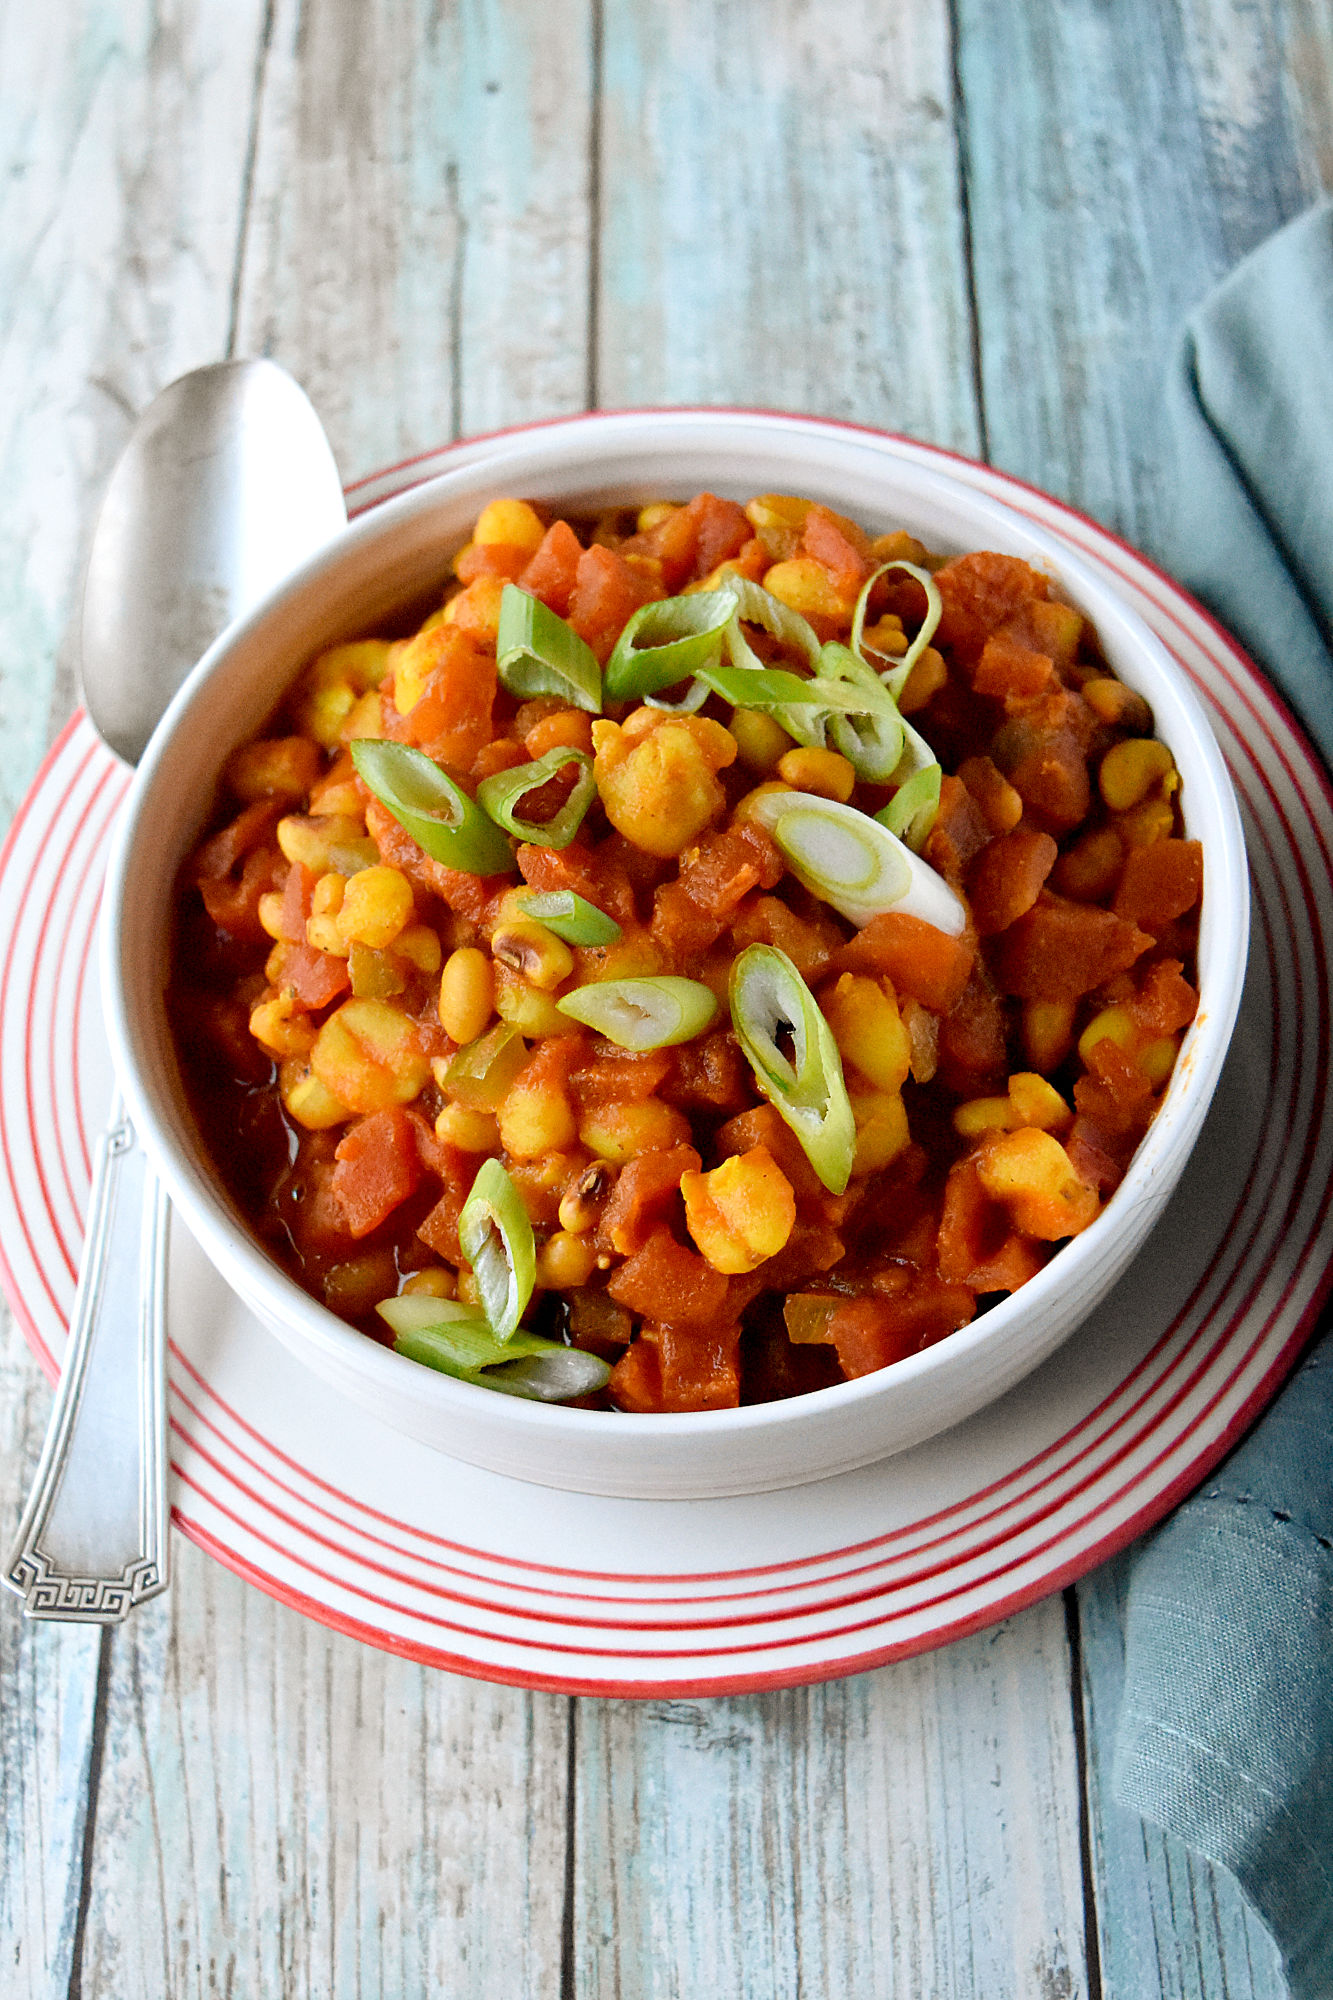 Quick Samp and Beans cooks up in under 40 minutes with all day flavor.